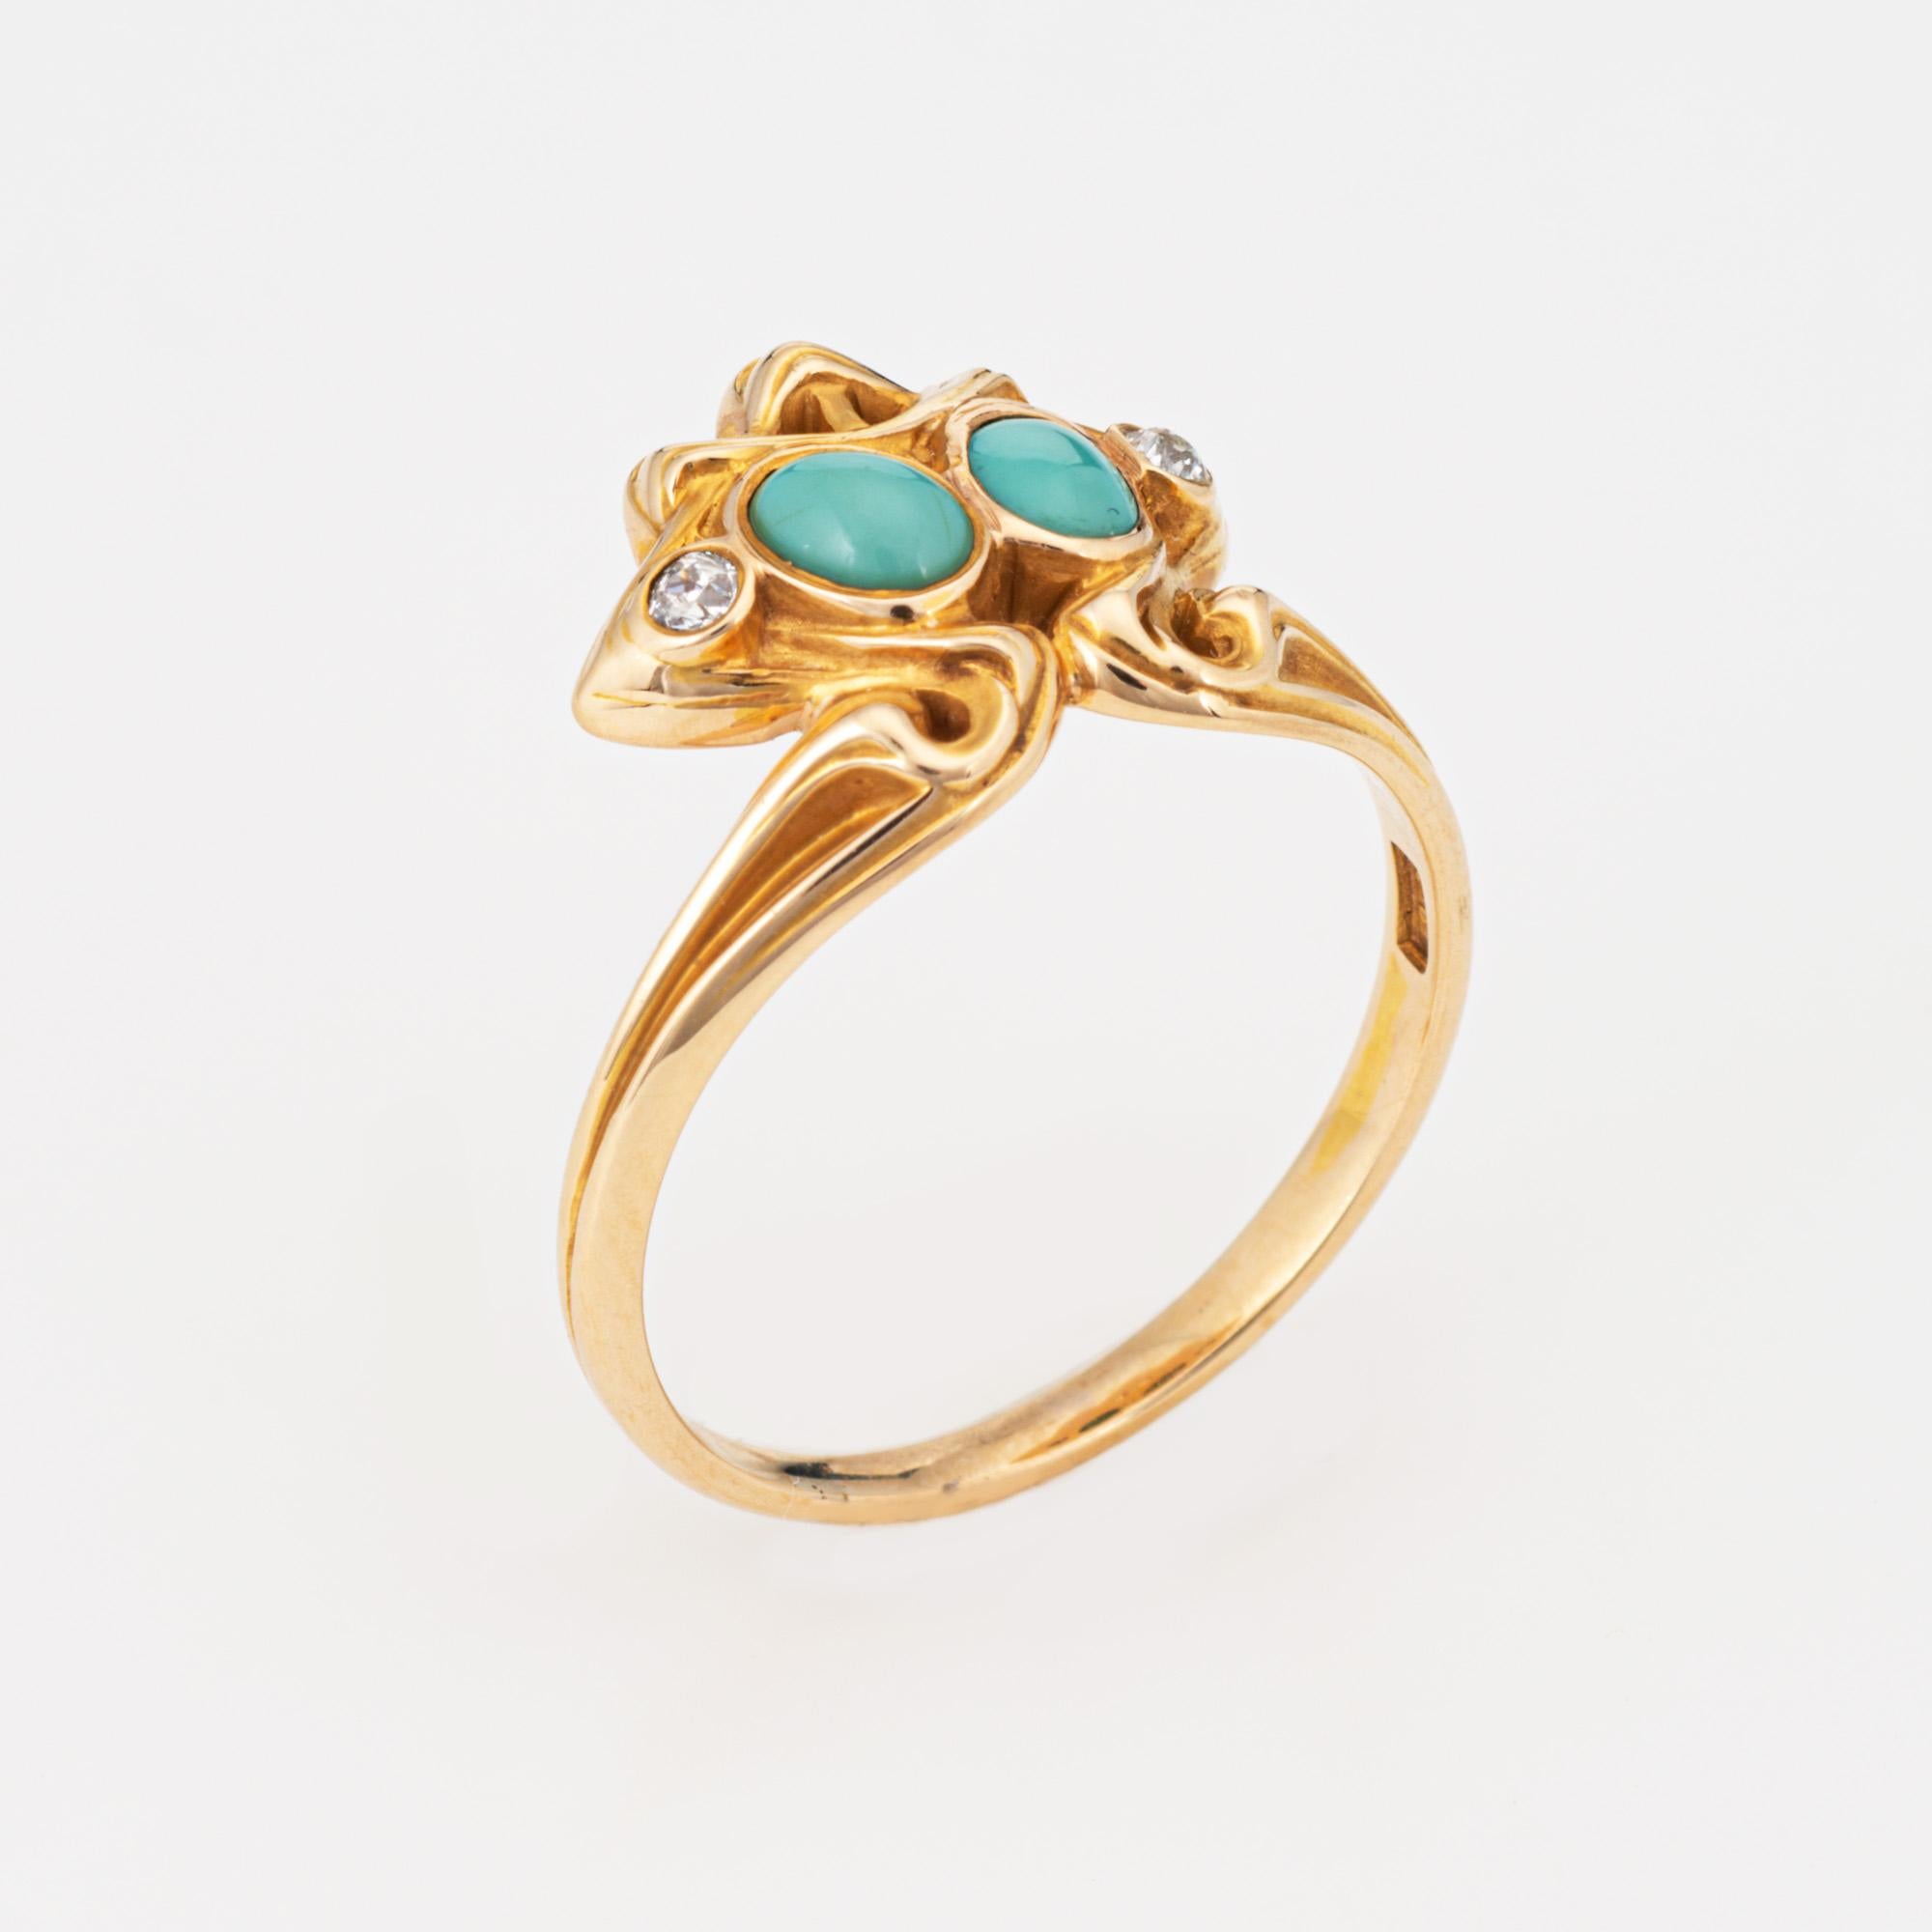 Finely detailed antique Art Nouveau era Larter & Sons turquoise & diamond ring crafted in 14k yellow gold (circa 1900s to 1910s). 

Turquoise measures 4mm x 3mm, accented with two estimated 0.02 carat old mine cut diamonds (estimated at I-J color